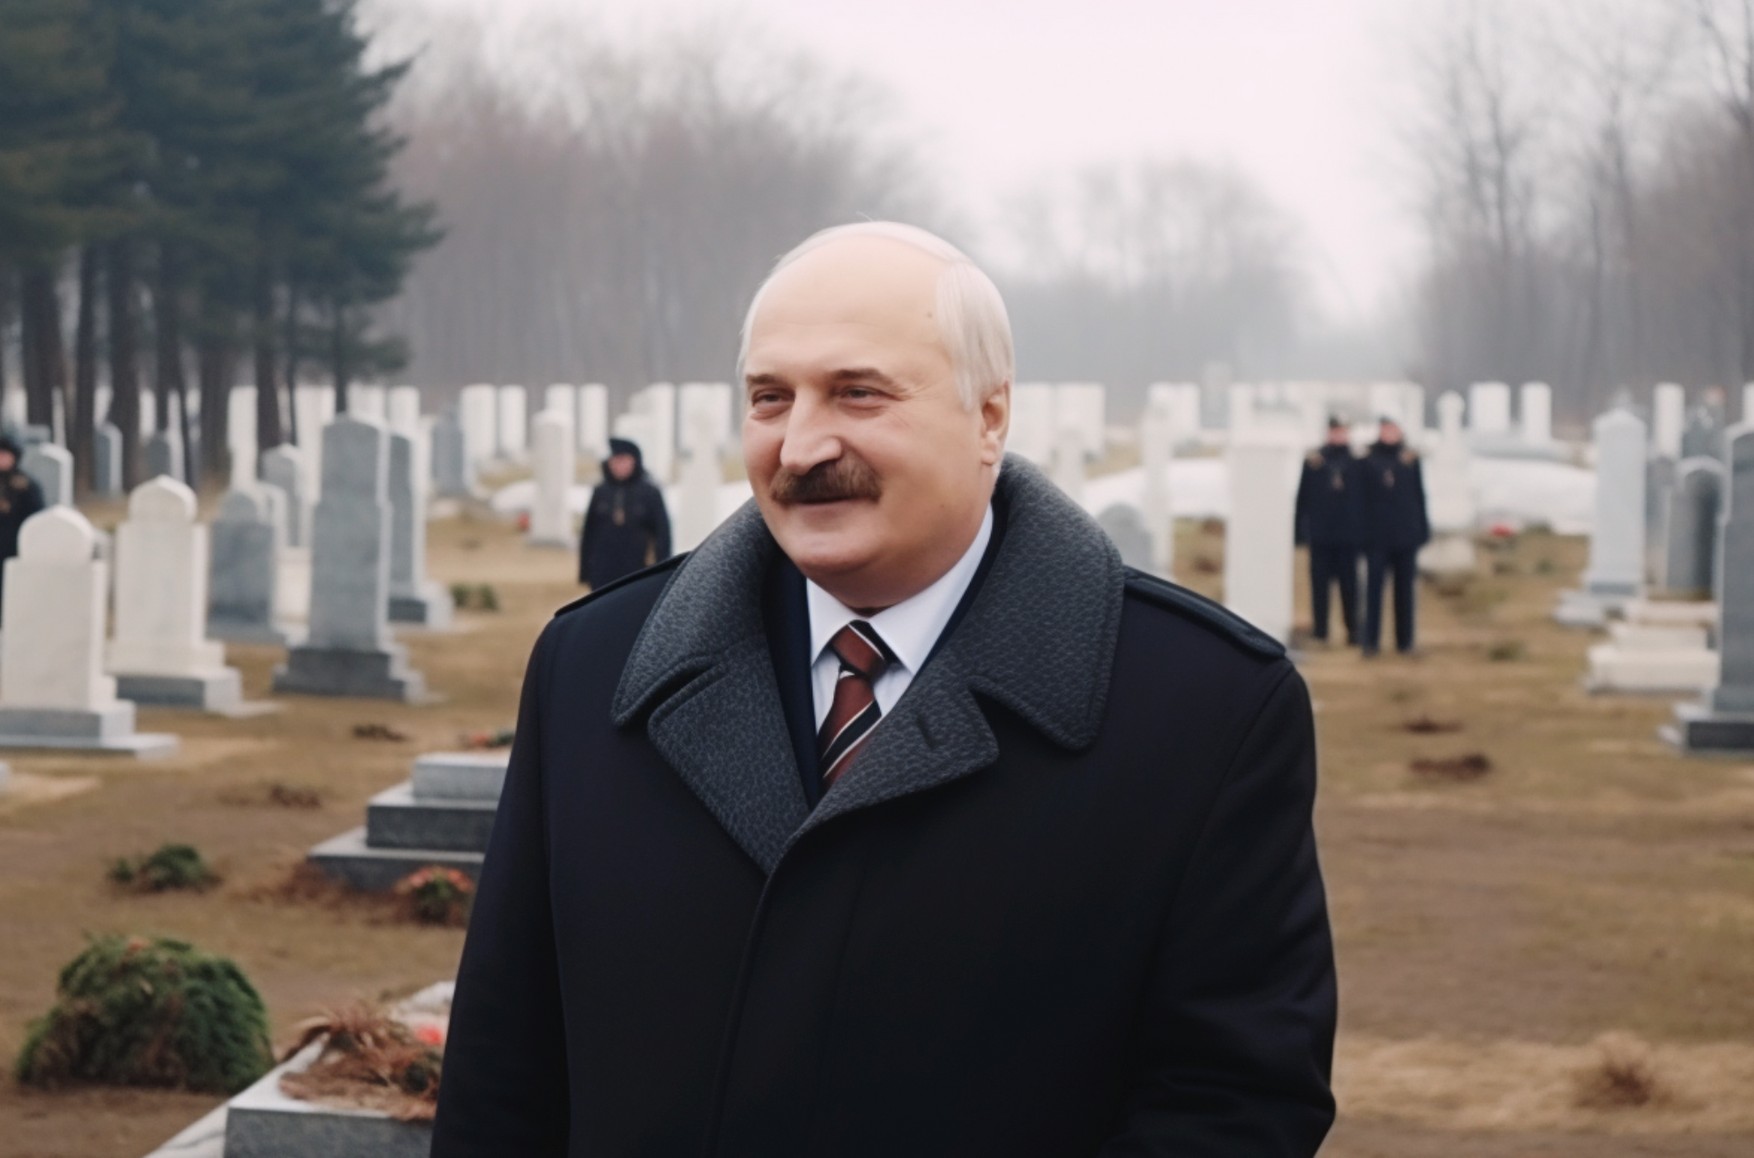 In Belarus It Was Allowed To Start Cases Against The In Belarus, It Was Allowed To Start Cases Against The Dead And Hold Courts Over Them